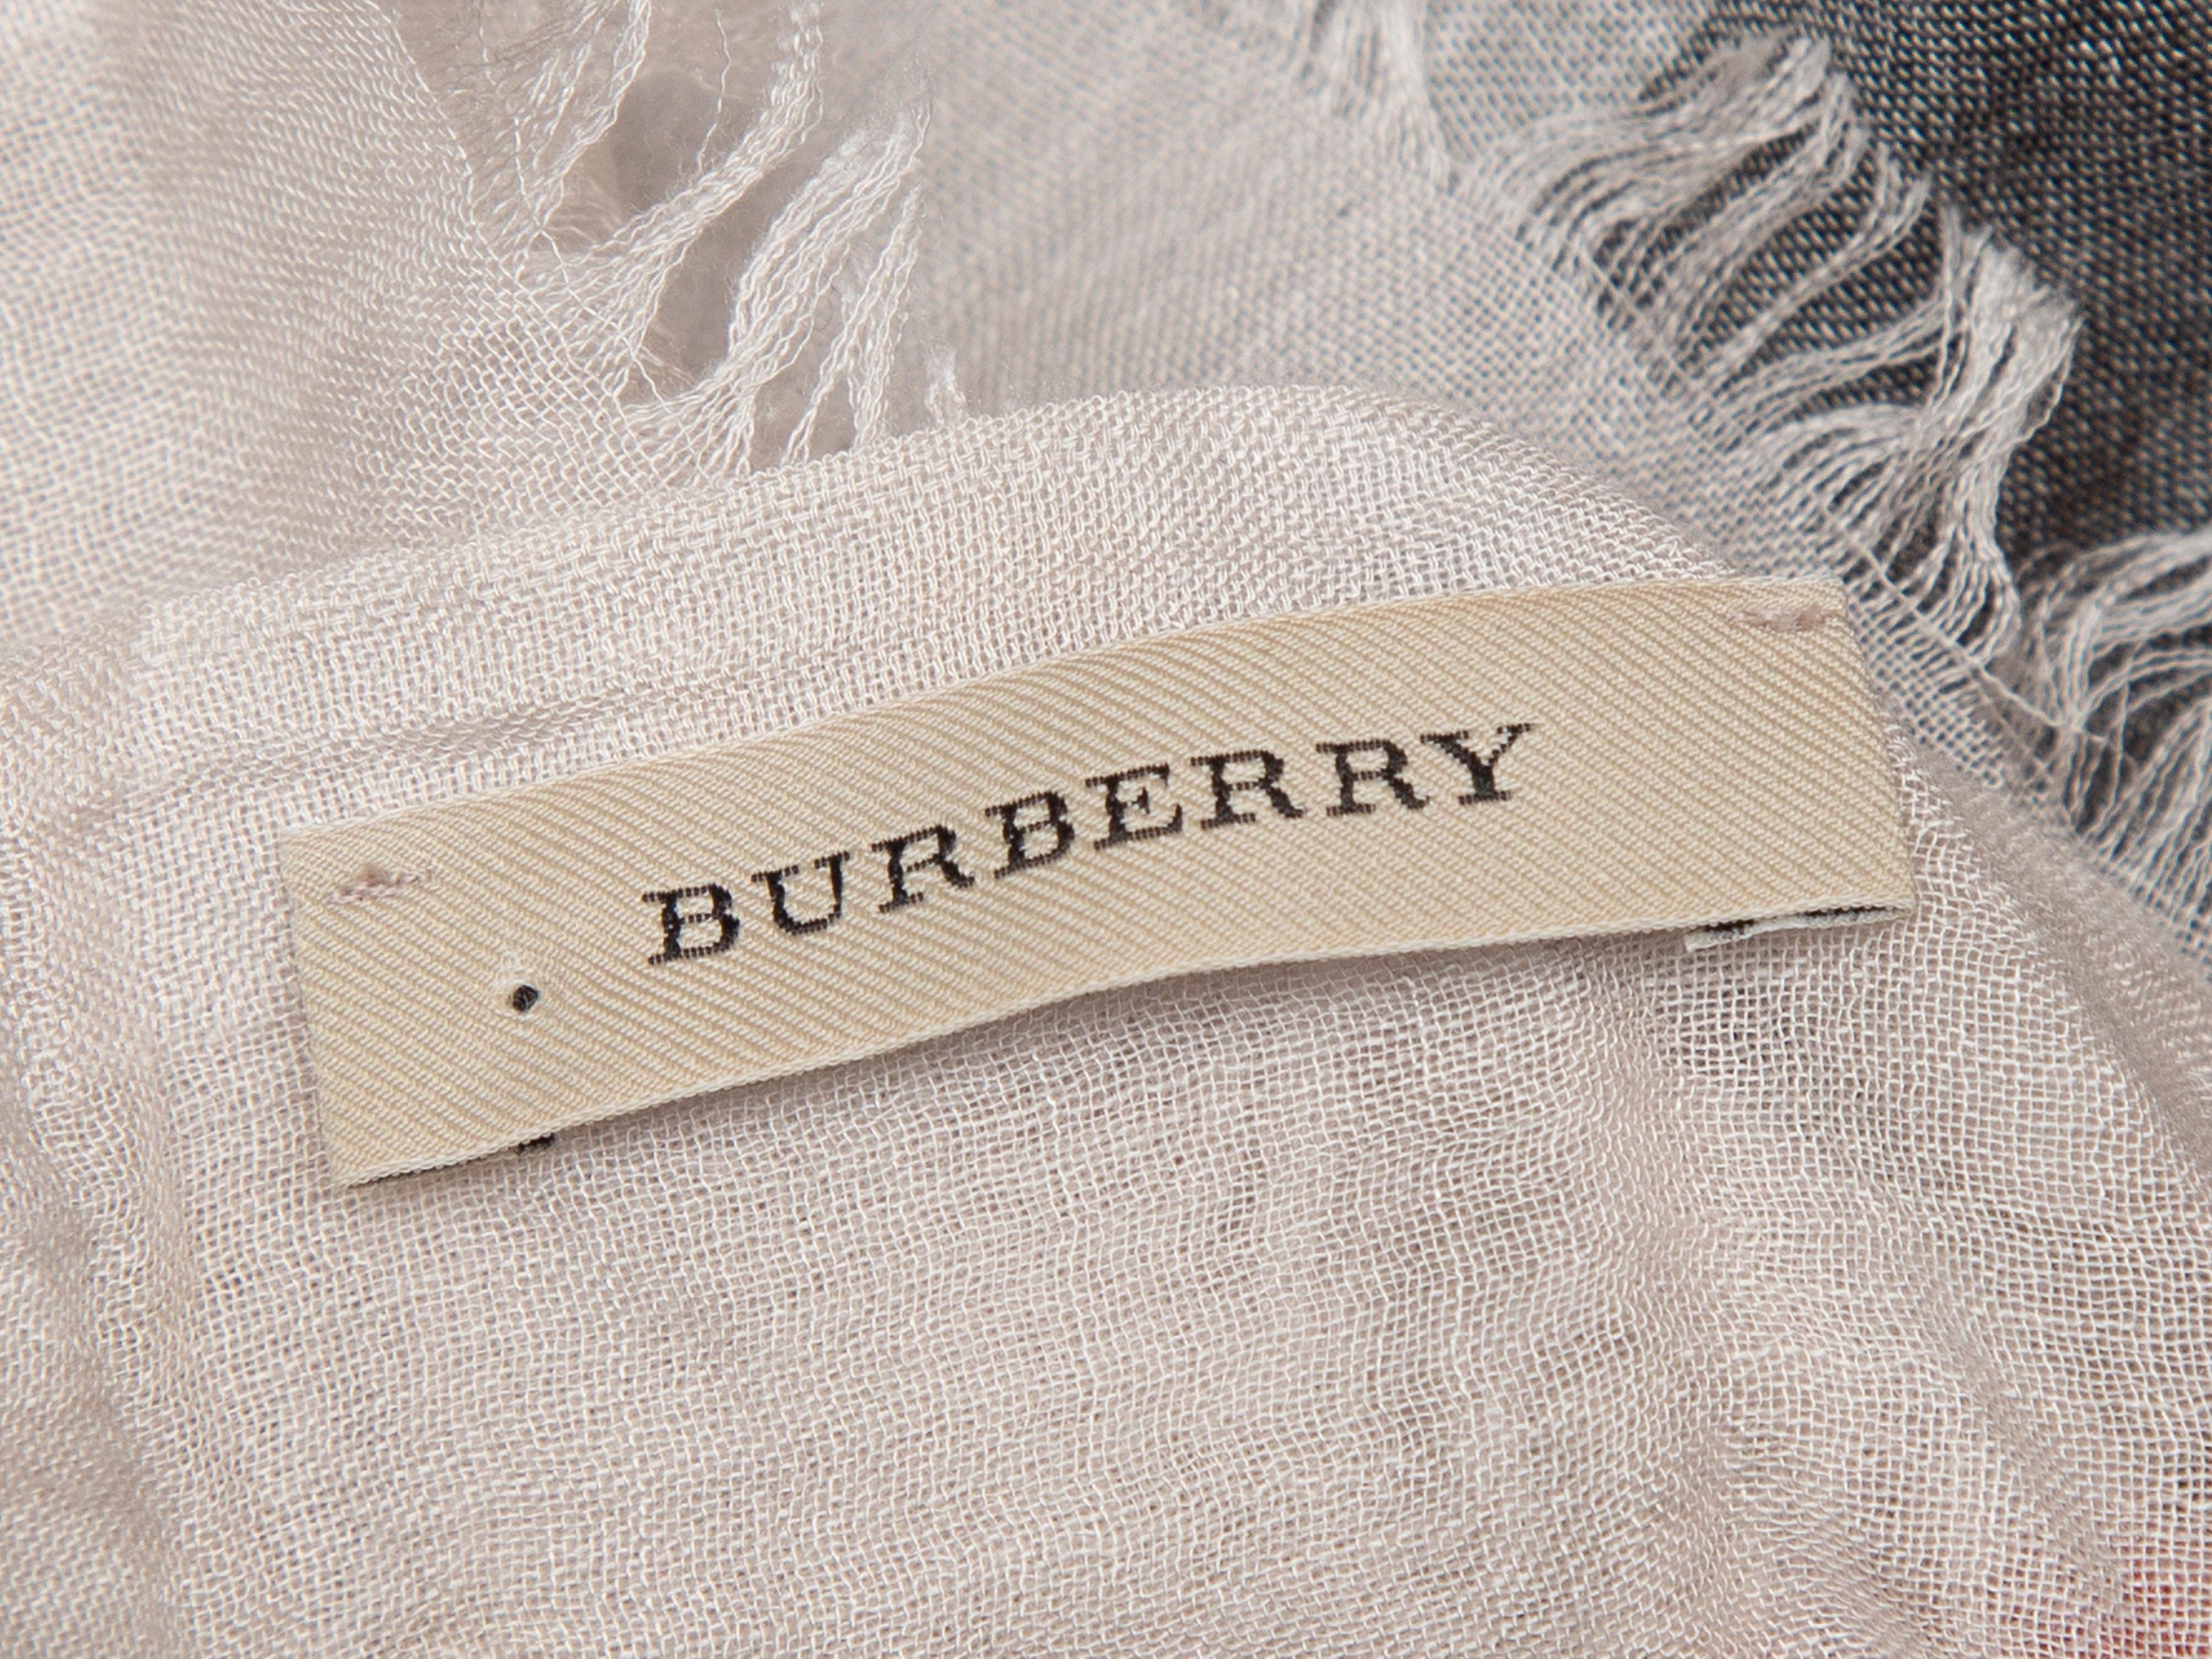 Product details: White, grey, and red silk-blend Nova Check scarf by Burberry. Fringe trim at ends. 36